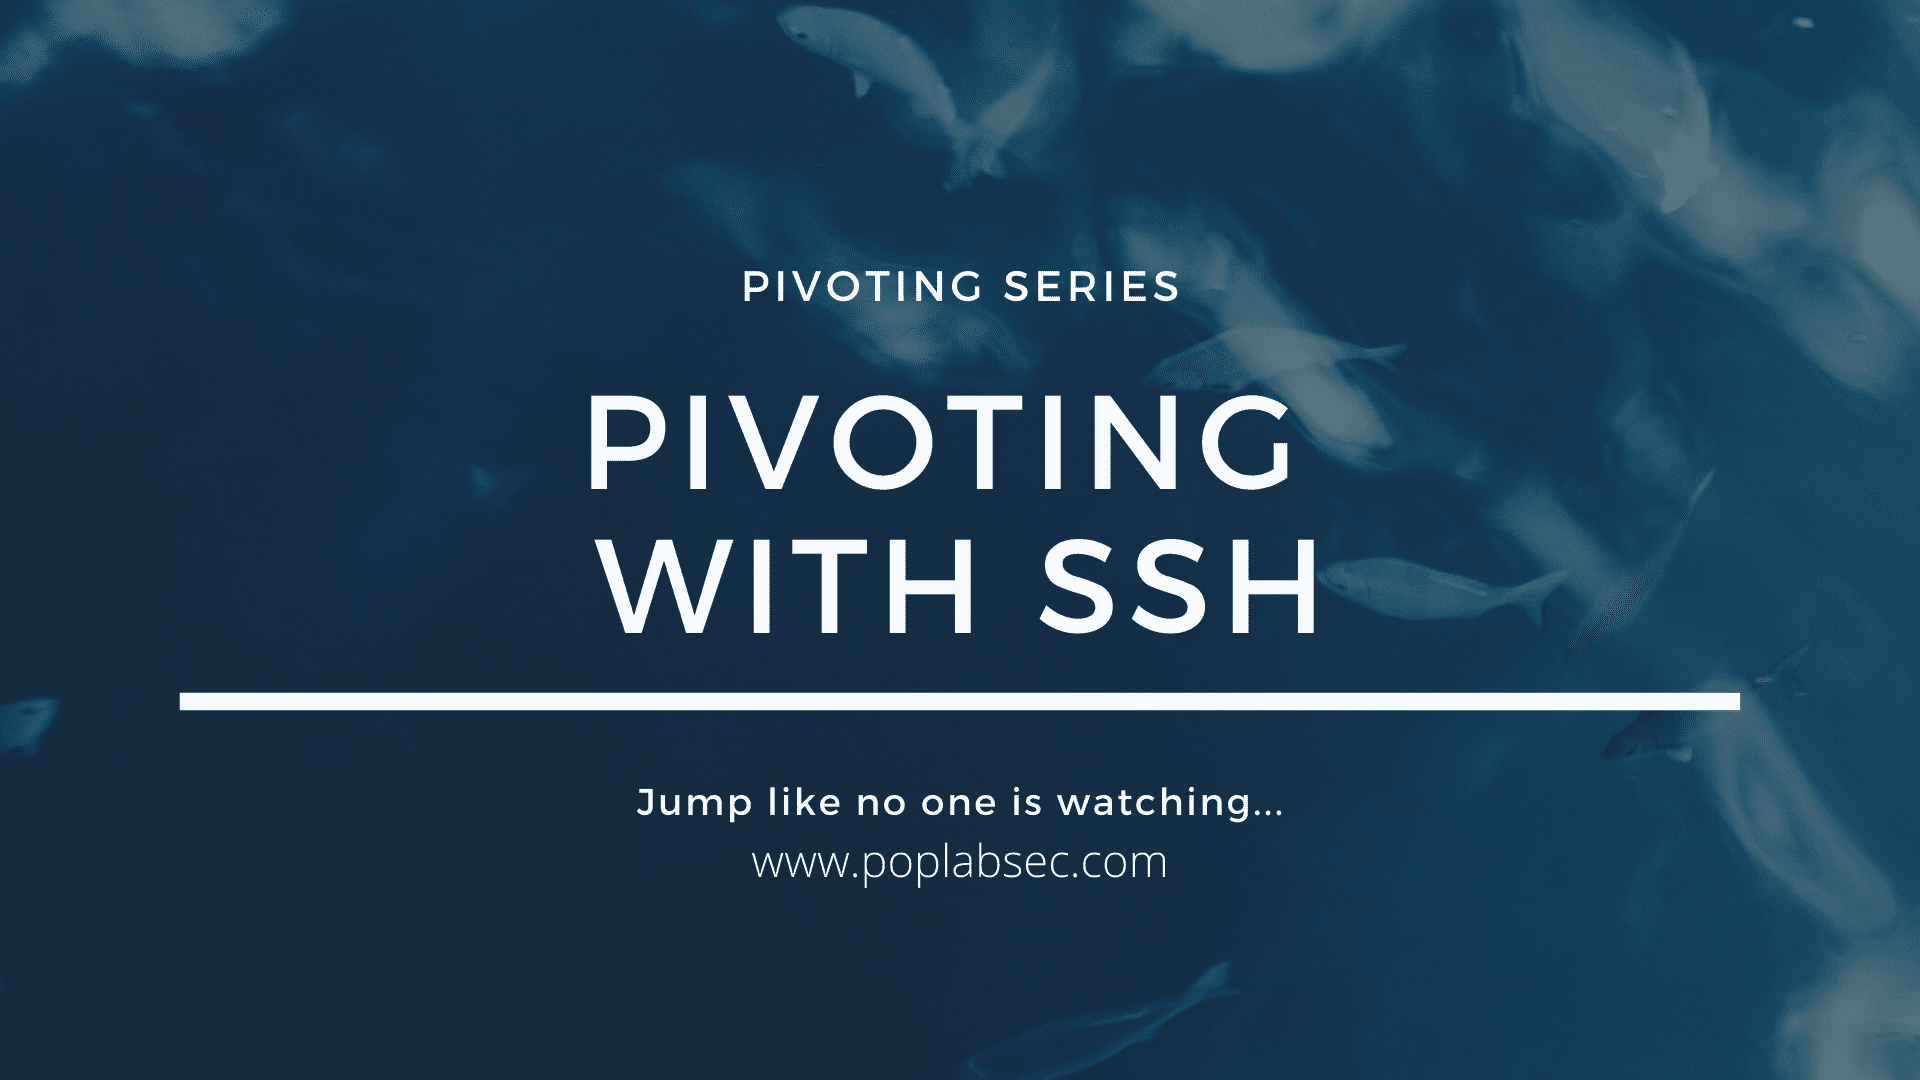 Pivoting with SSH